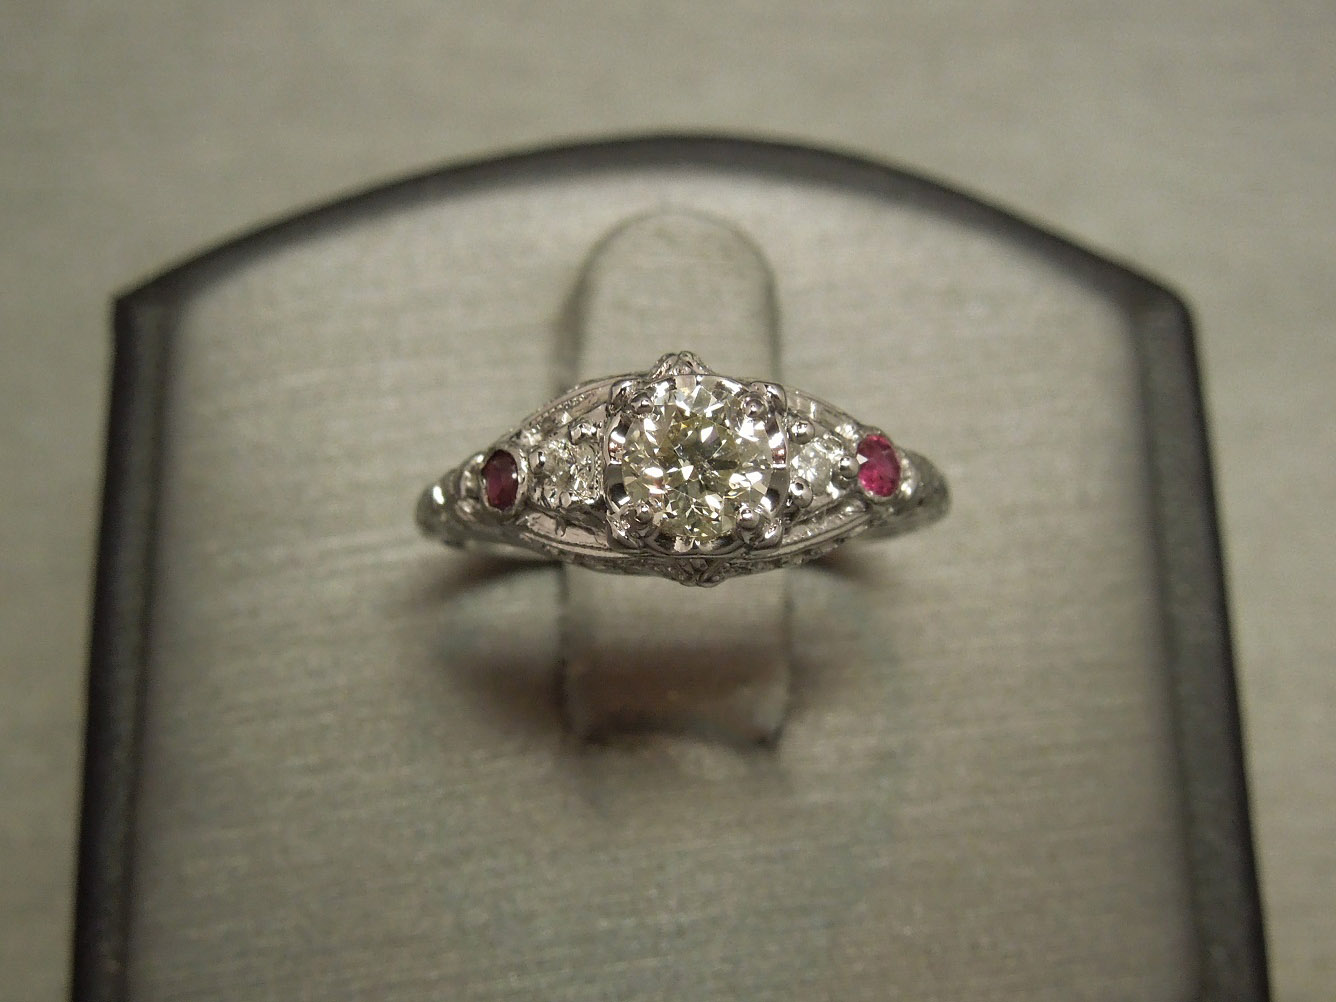 3.5 CT #184 LAB RUBY ANTIQUE DESIGN .925 STERLING SILVER FILIGREE RING Sz 4.75 